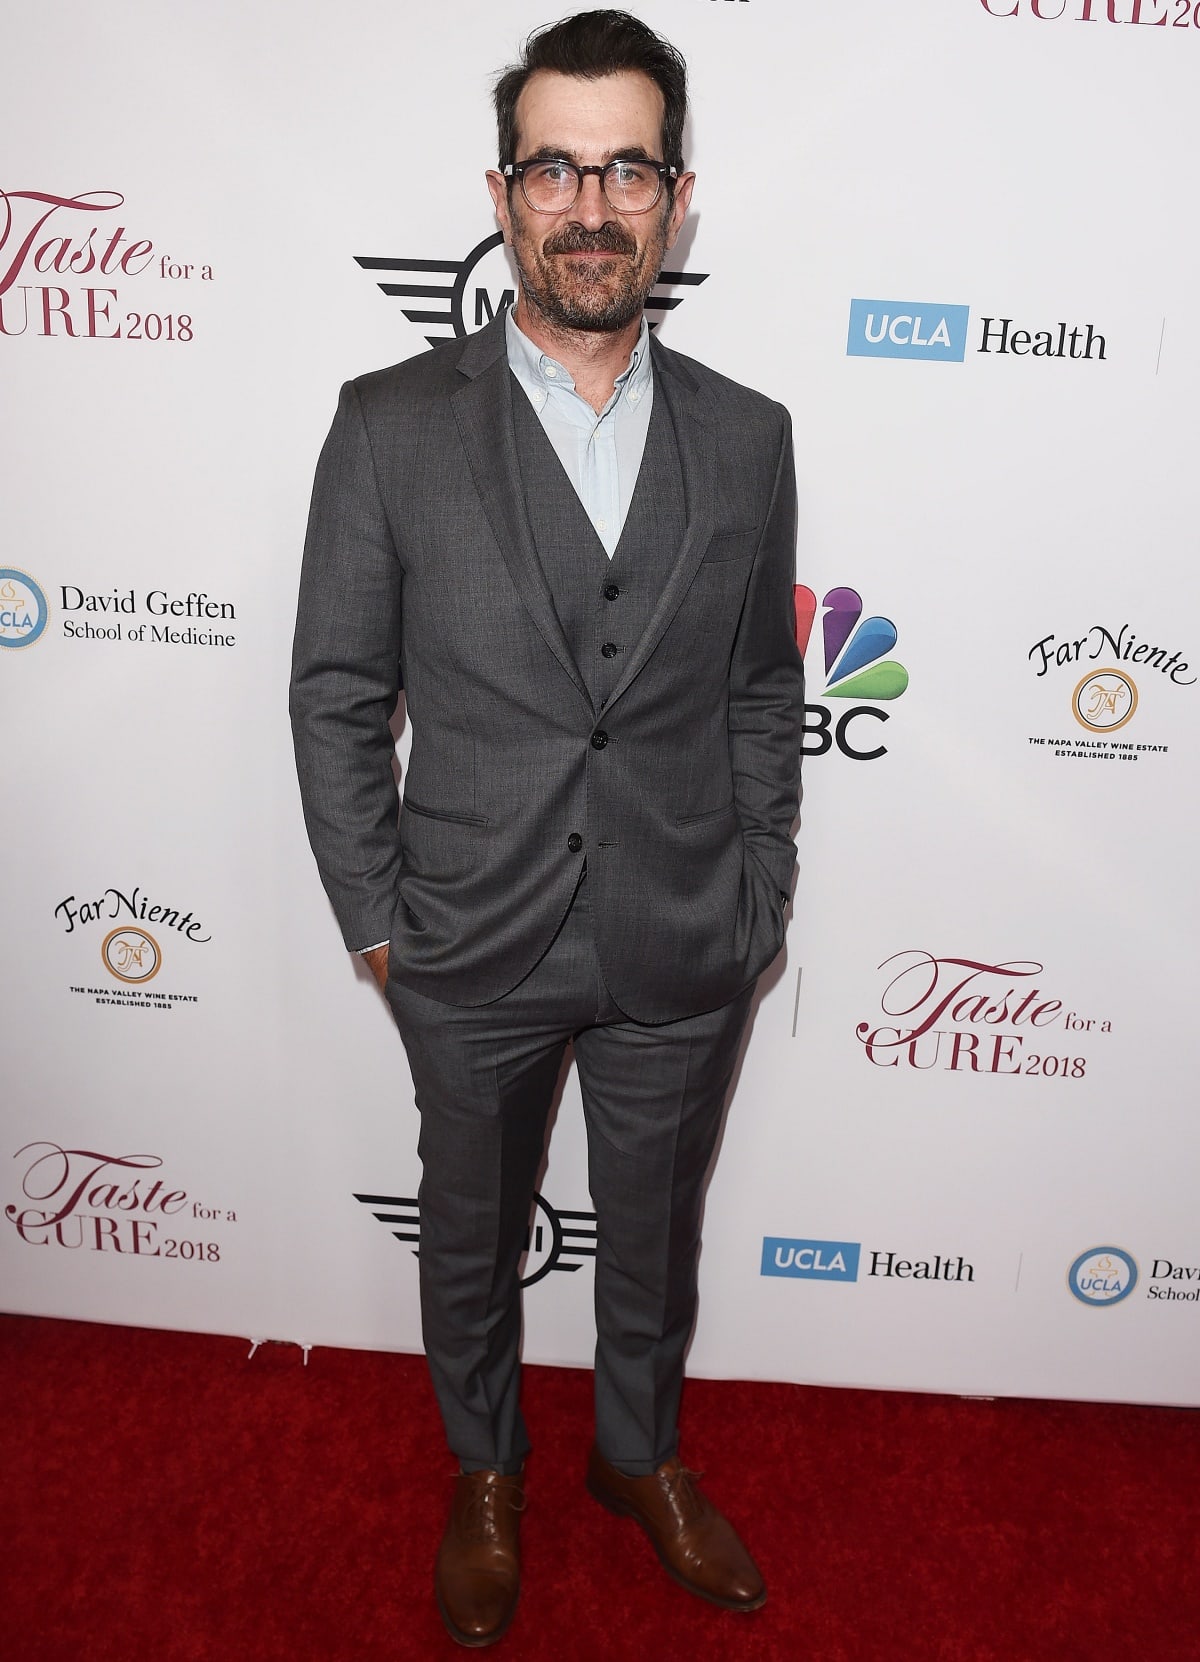 Ty Burrell stands at an impressive height of 6 feet and has a net worth of $26 million